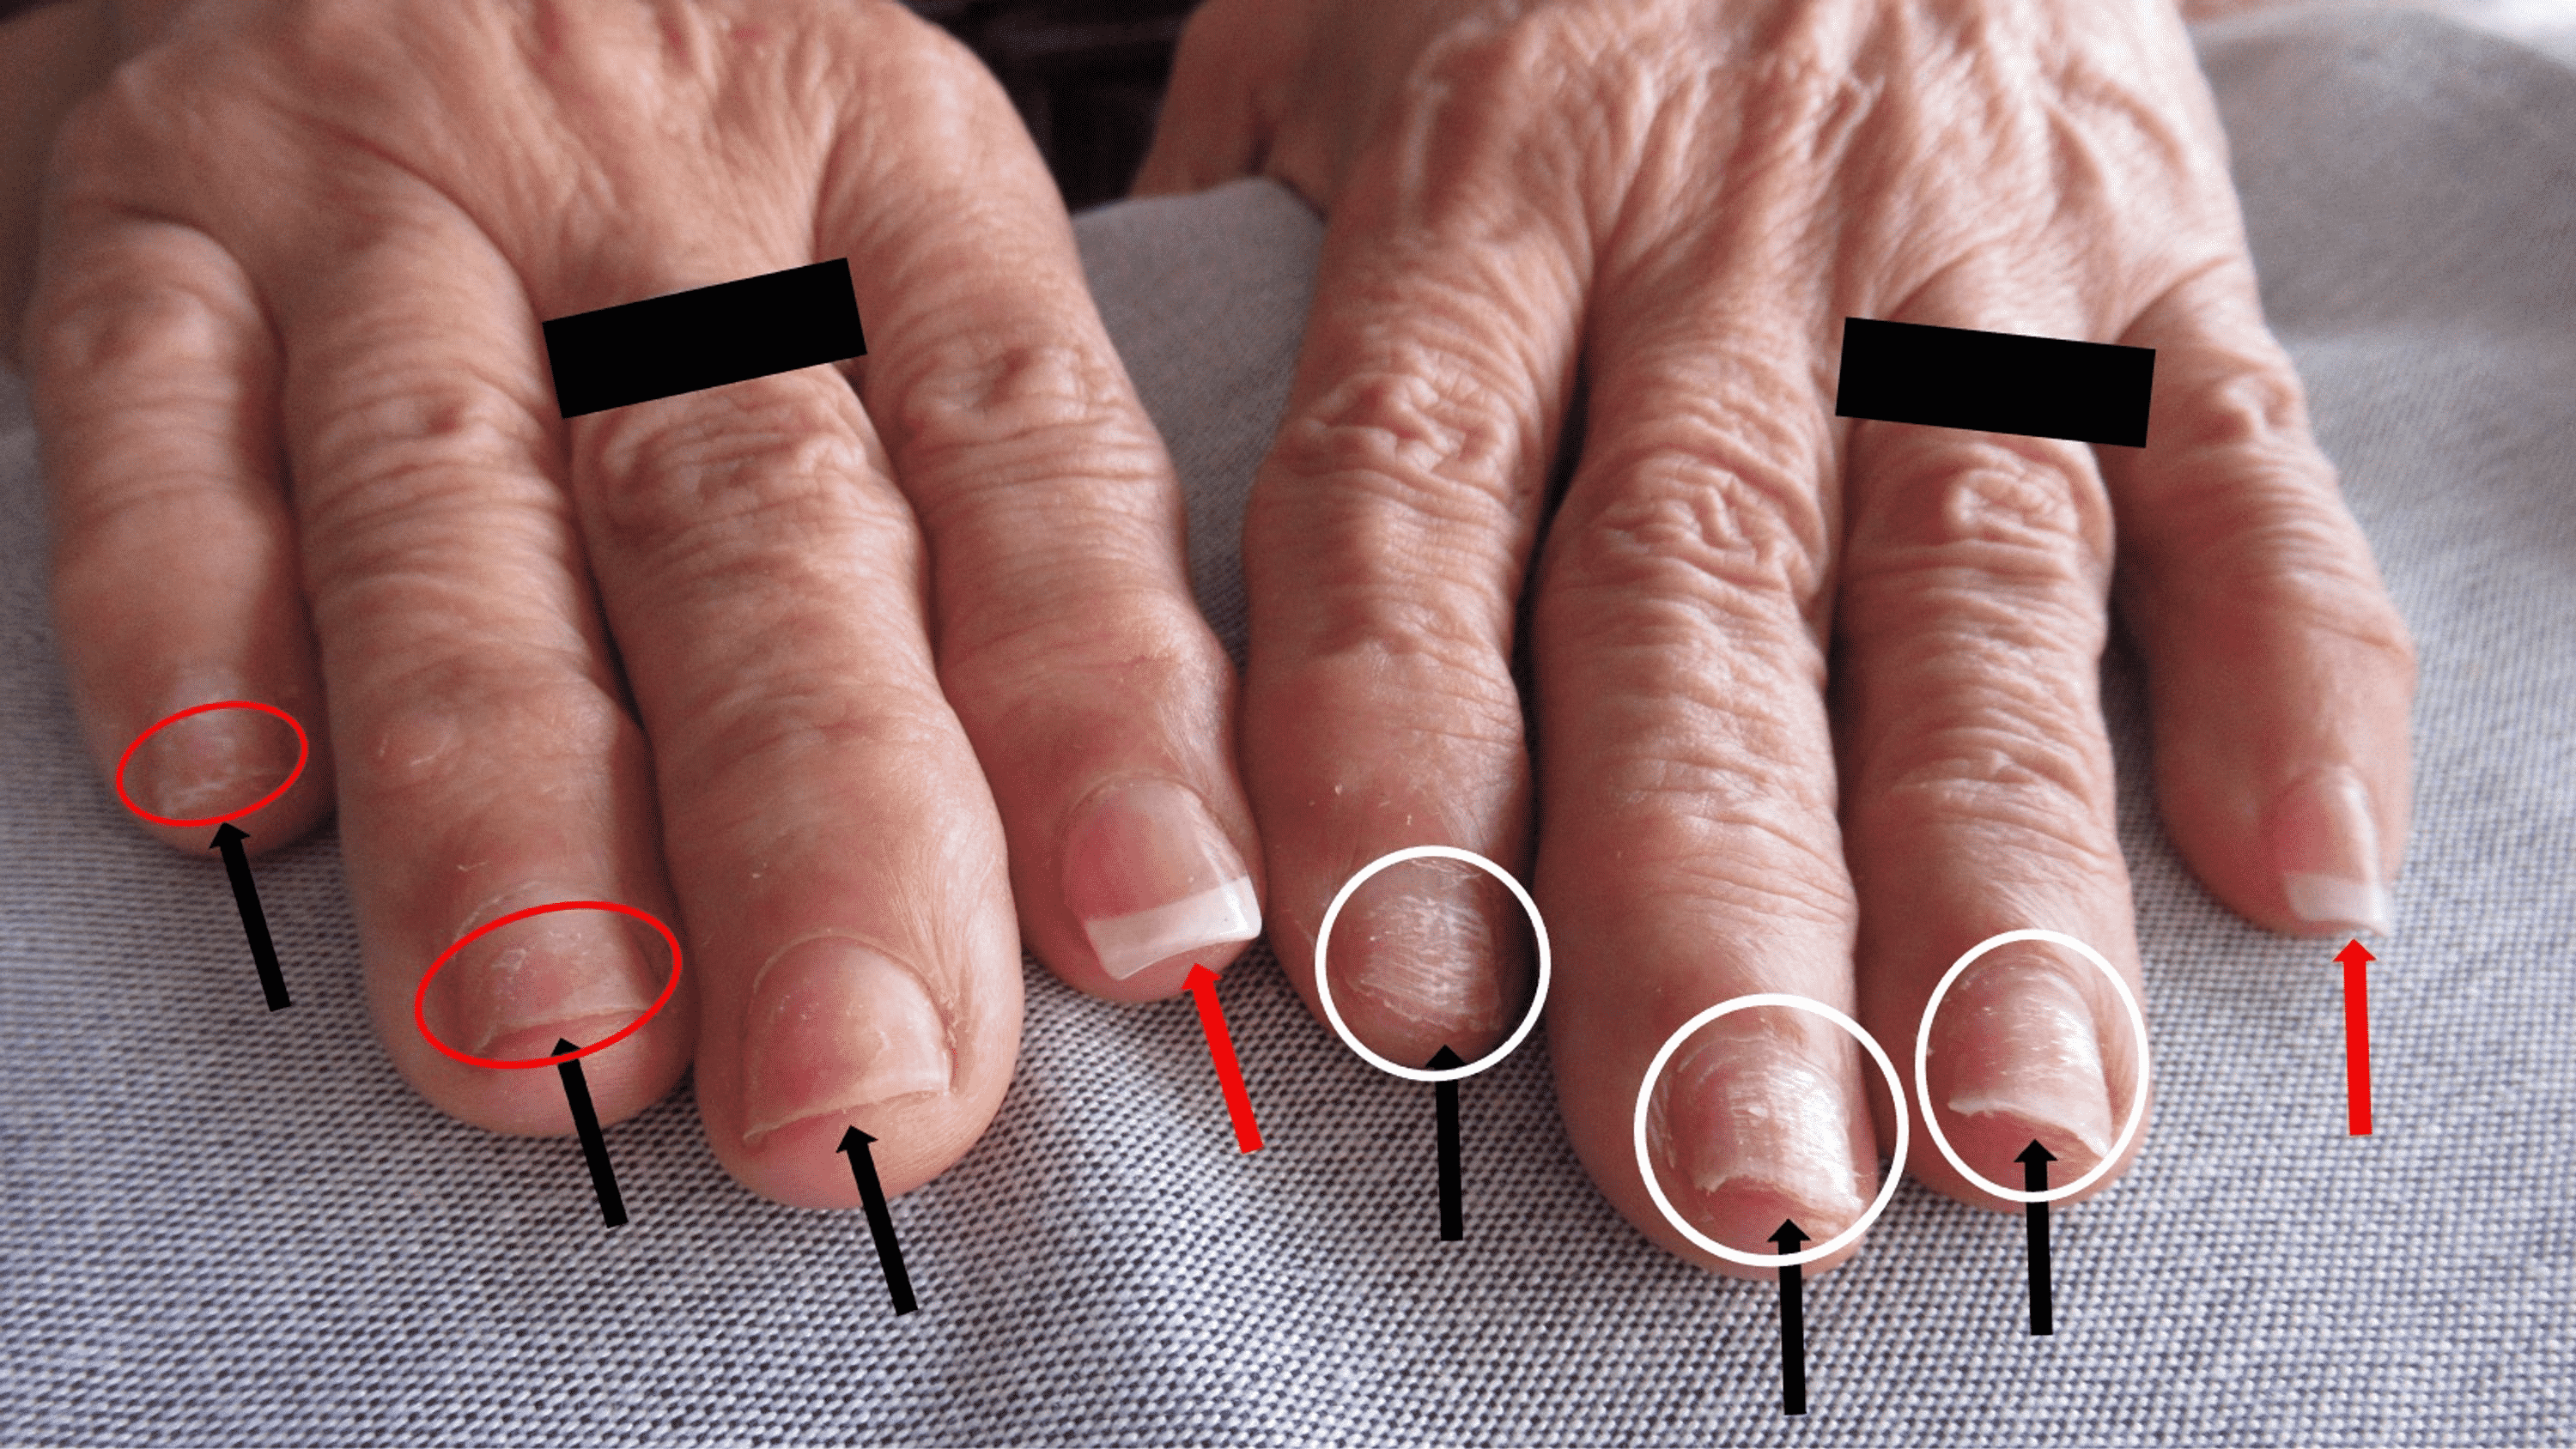 Cureus | Nailing the Diagnosis: Onychotillomania in Patients With Artificial  Nails—An Underrecognized Phenomenon? | Article